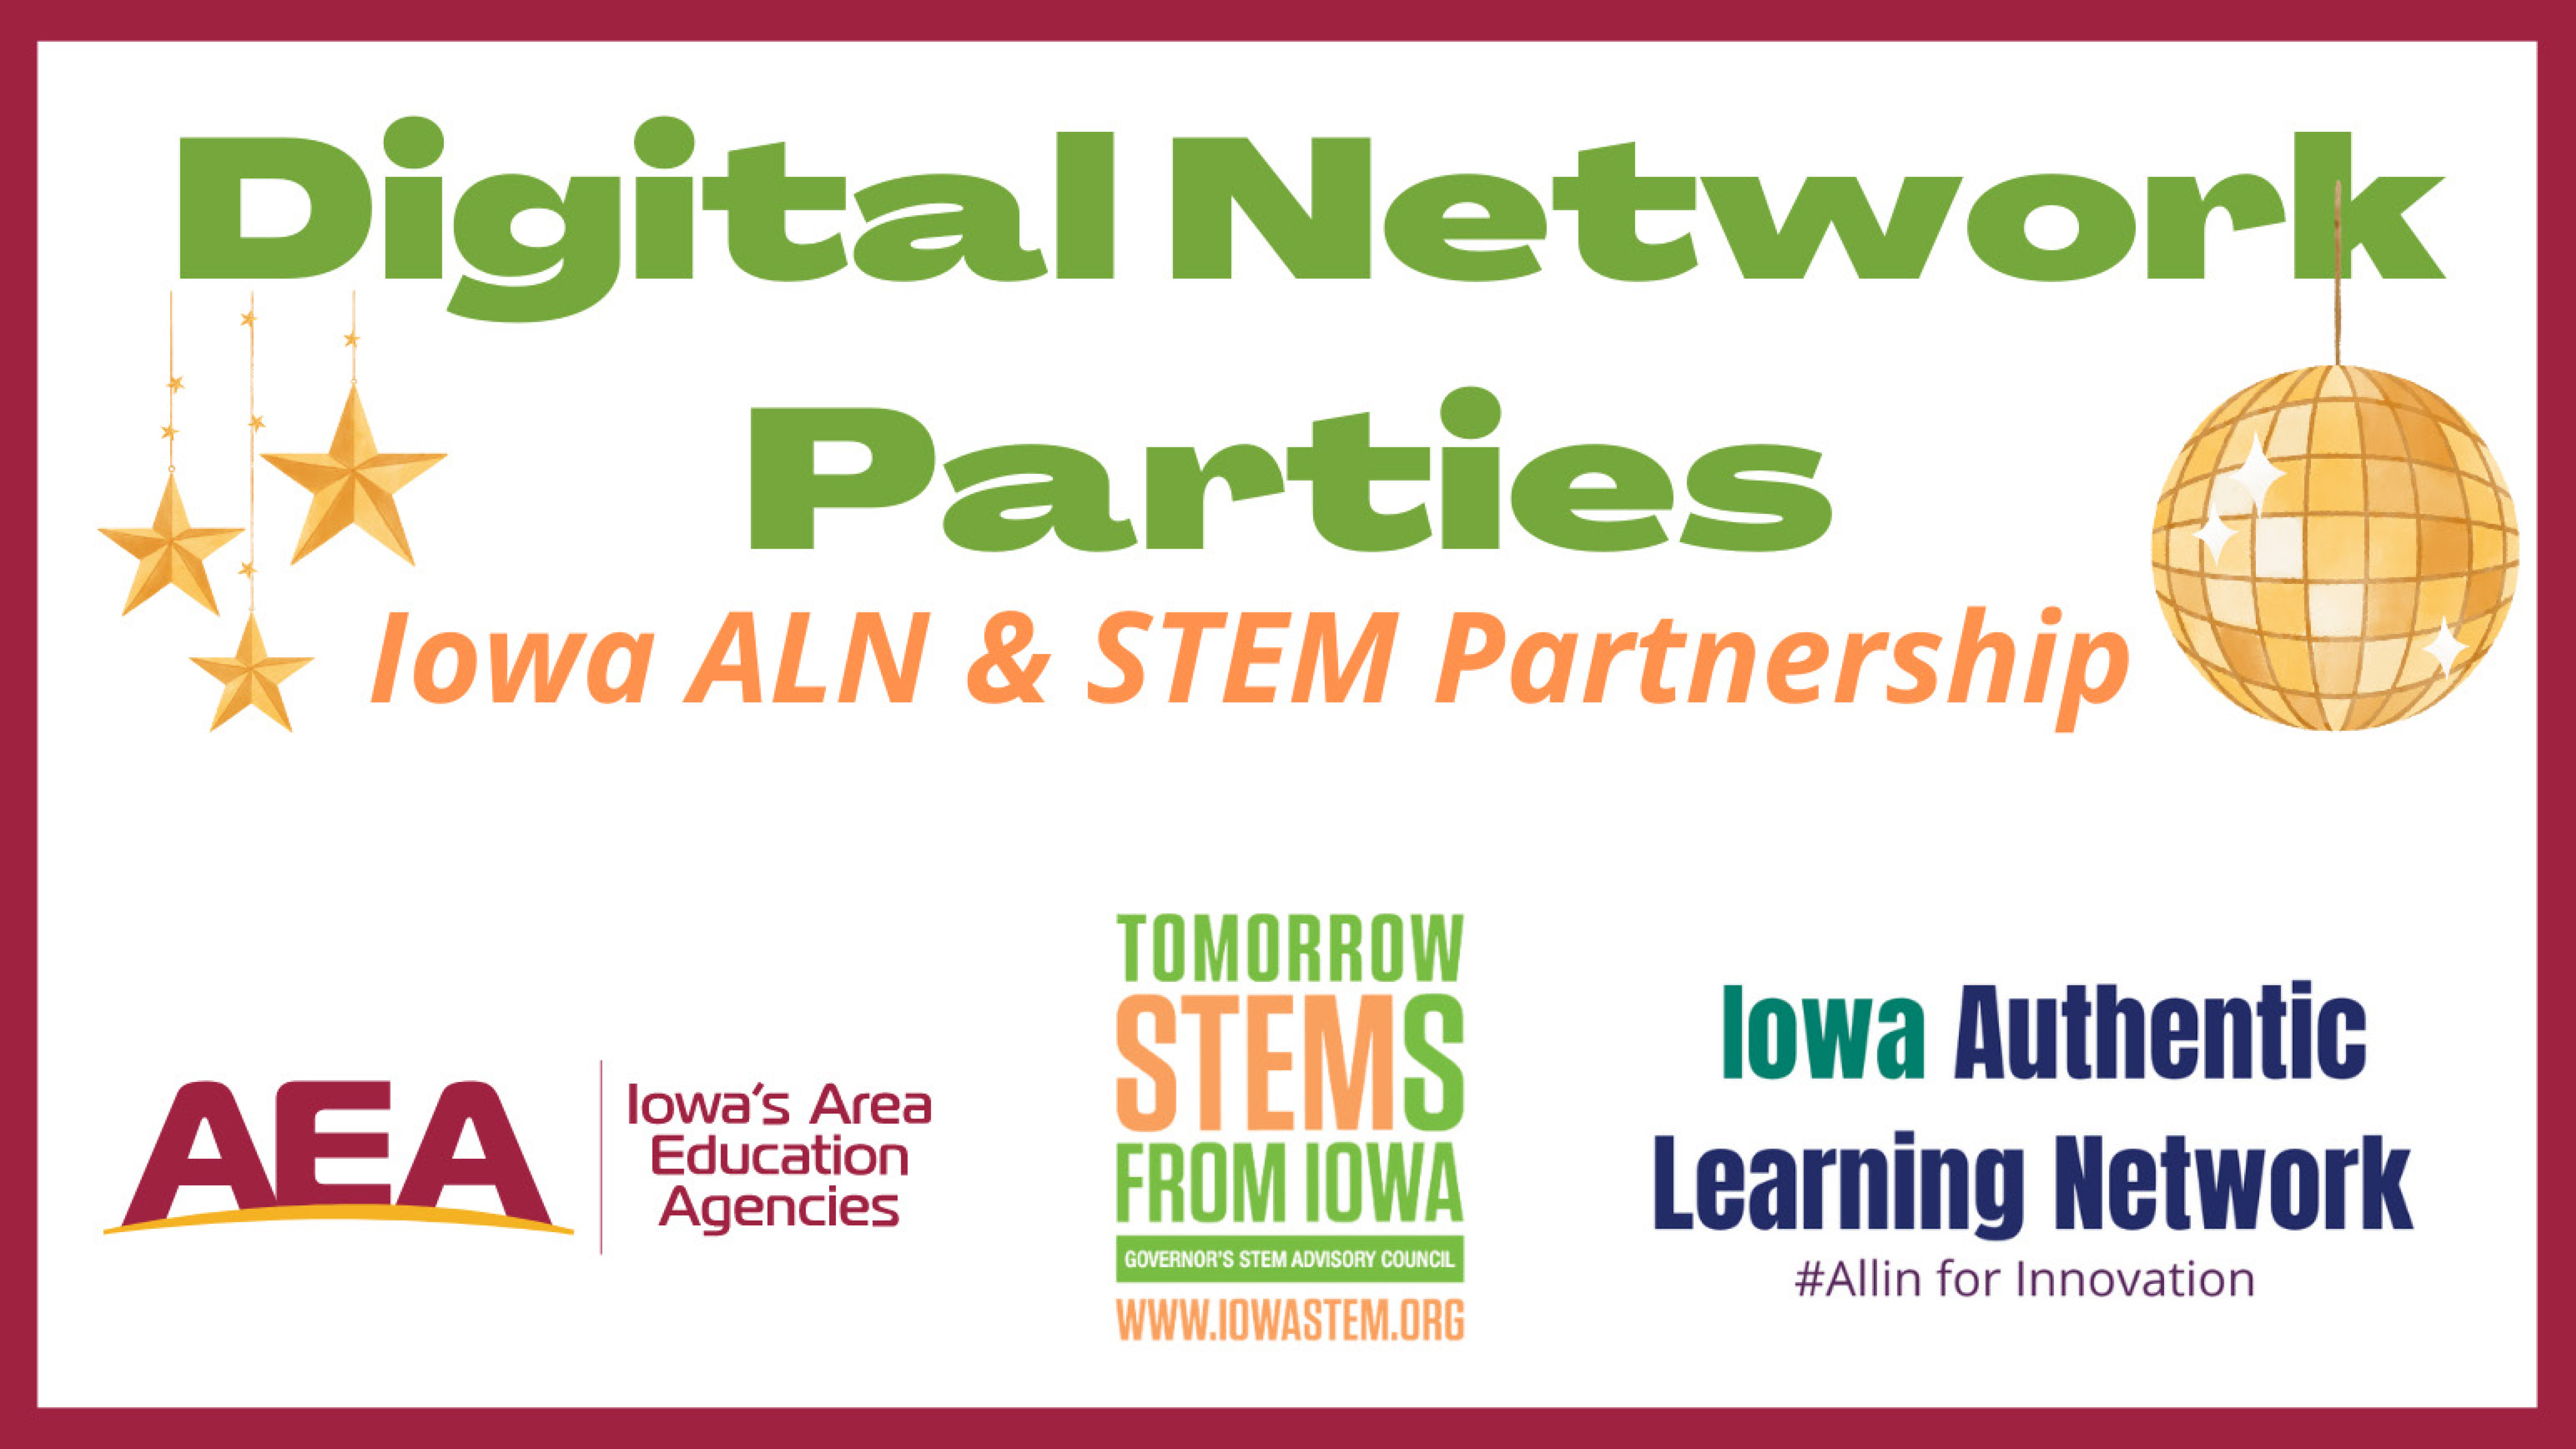 The STEM Council and Iowa Authentic Learning Network are partnering to offer a network for work-based learning.